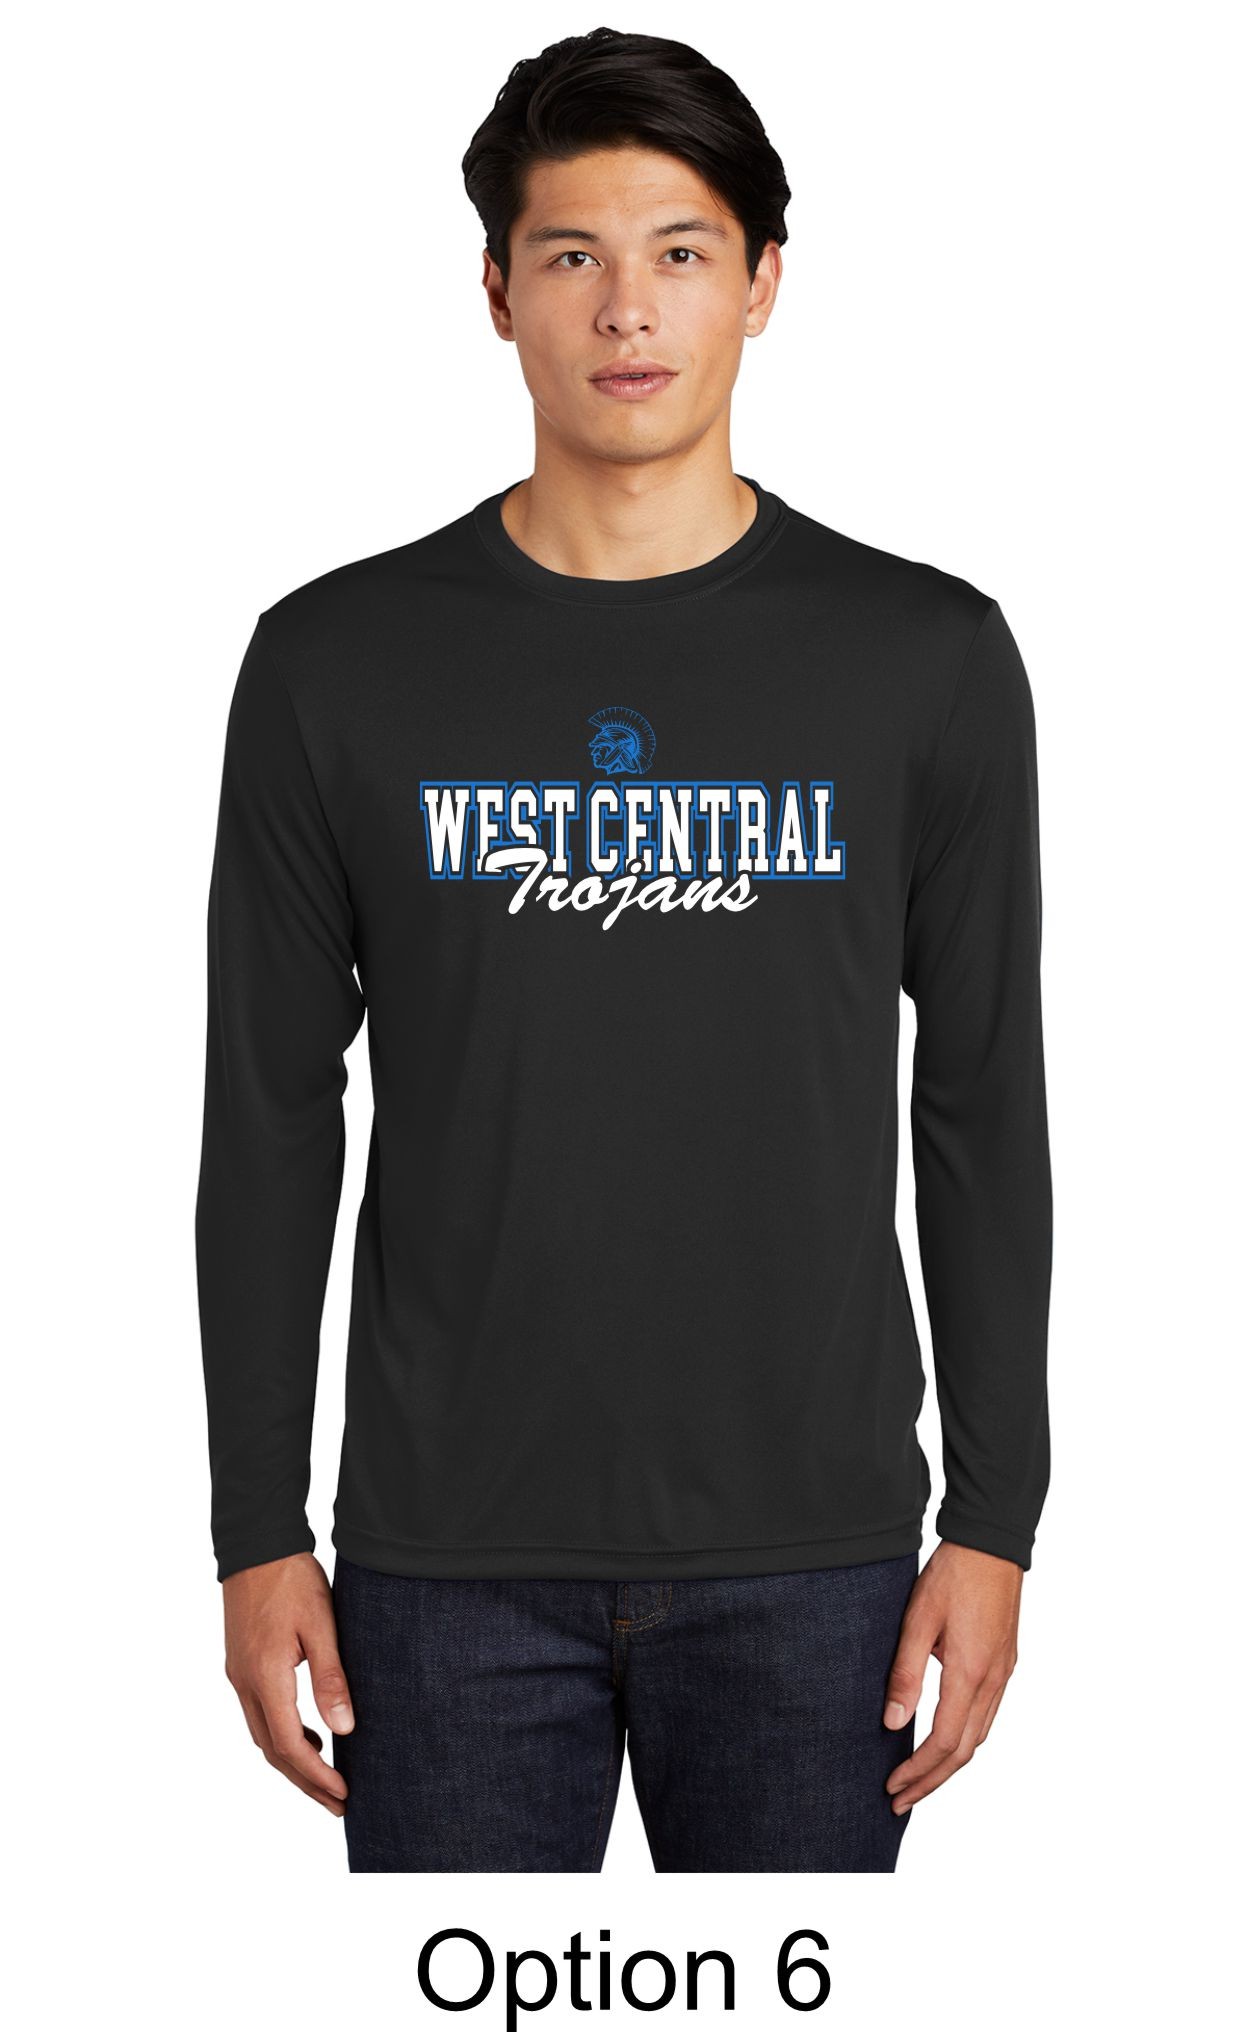 West Central Customizable Dri-Fit Long Sleeve - Black